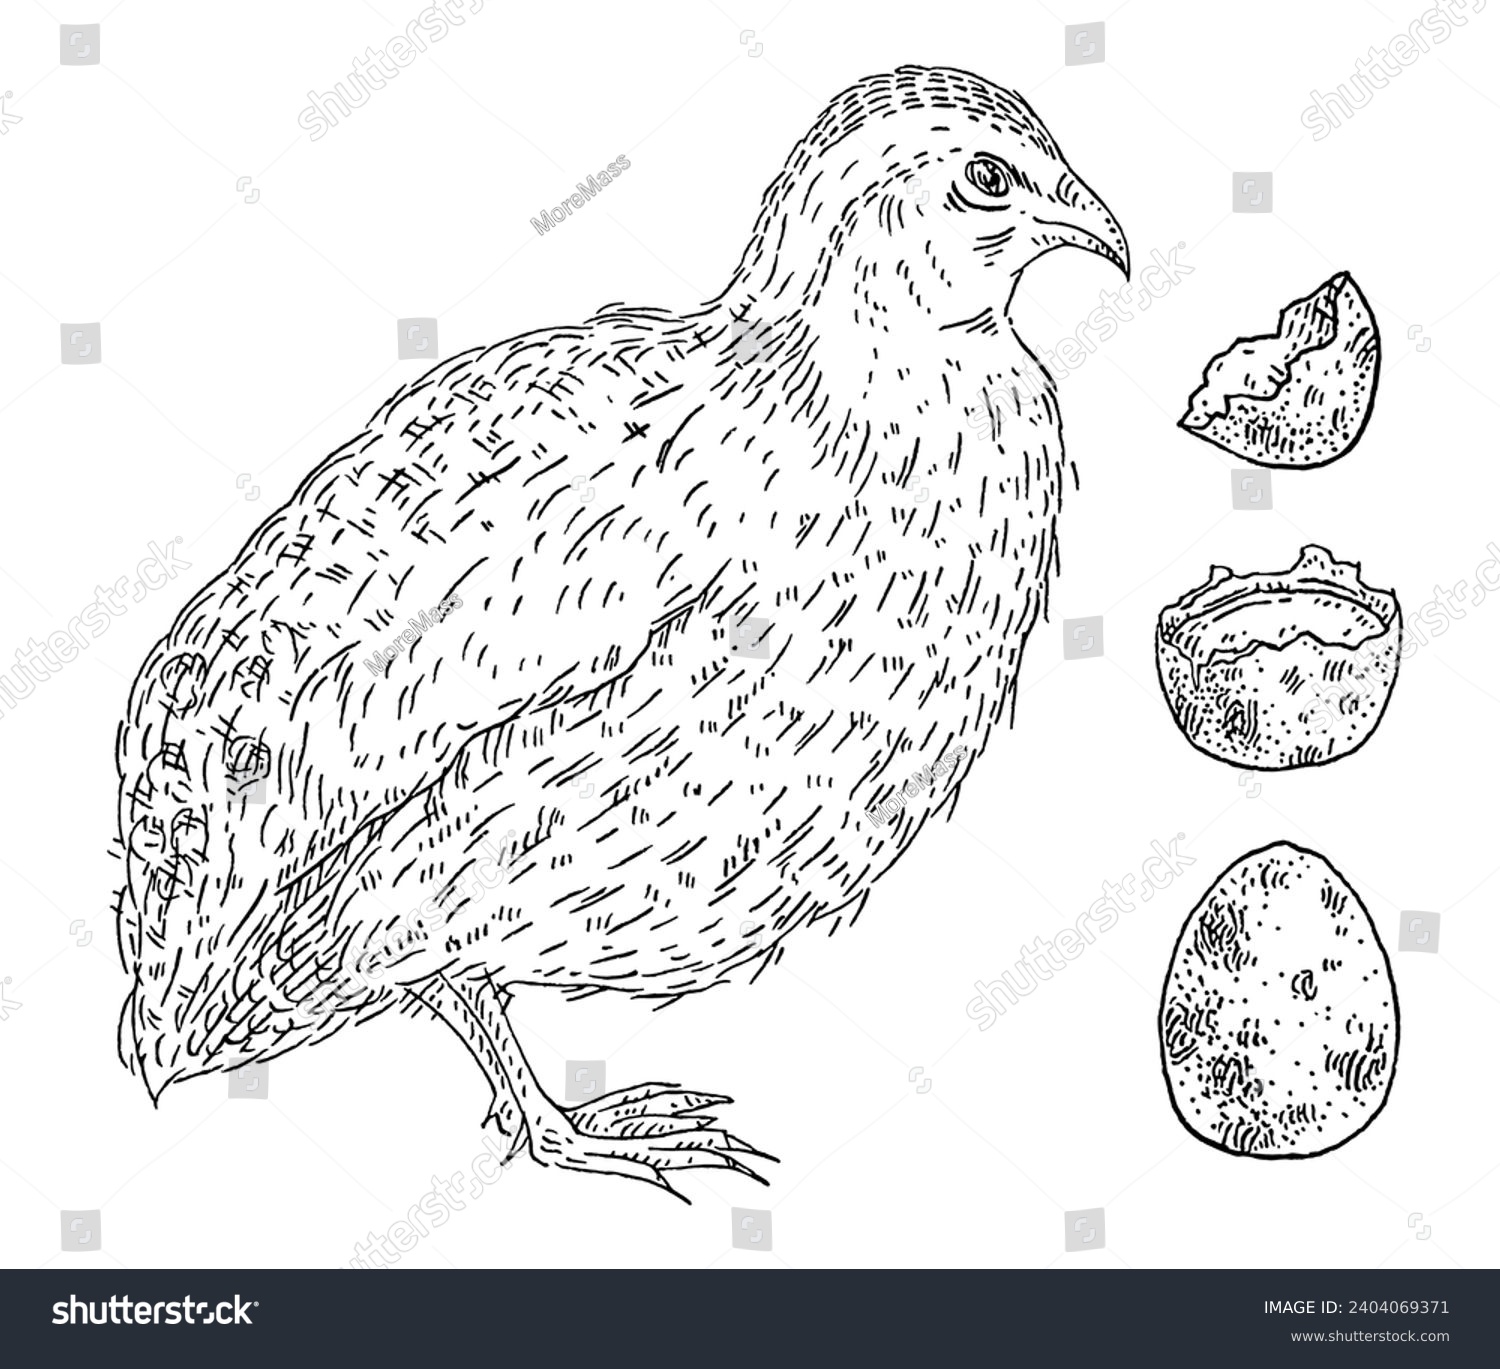 SVG of Standing quail with whole egg and broken shell. Side view. Vintage vector engraving black illustration. Isolated on white background. Hand drawn design svg